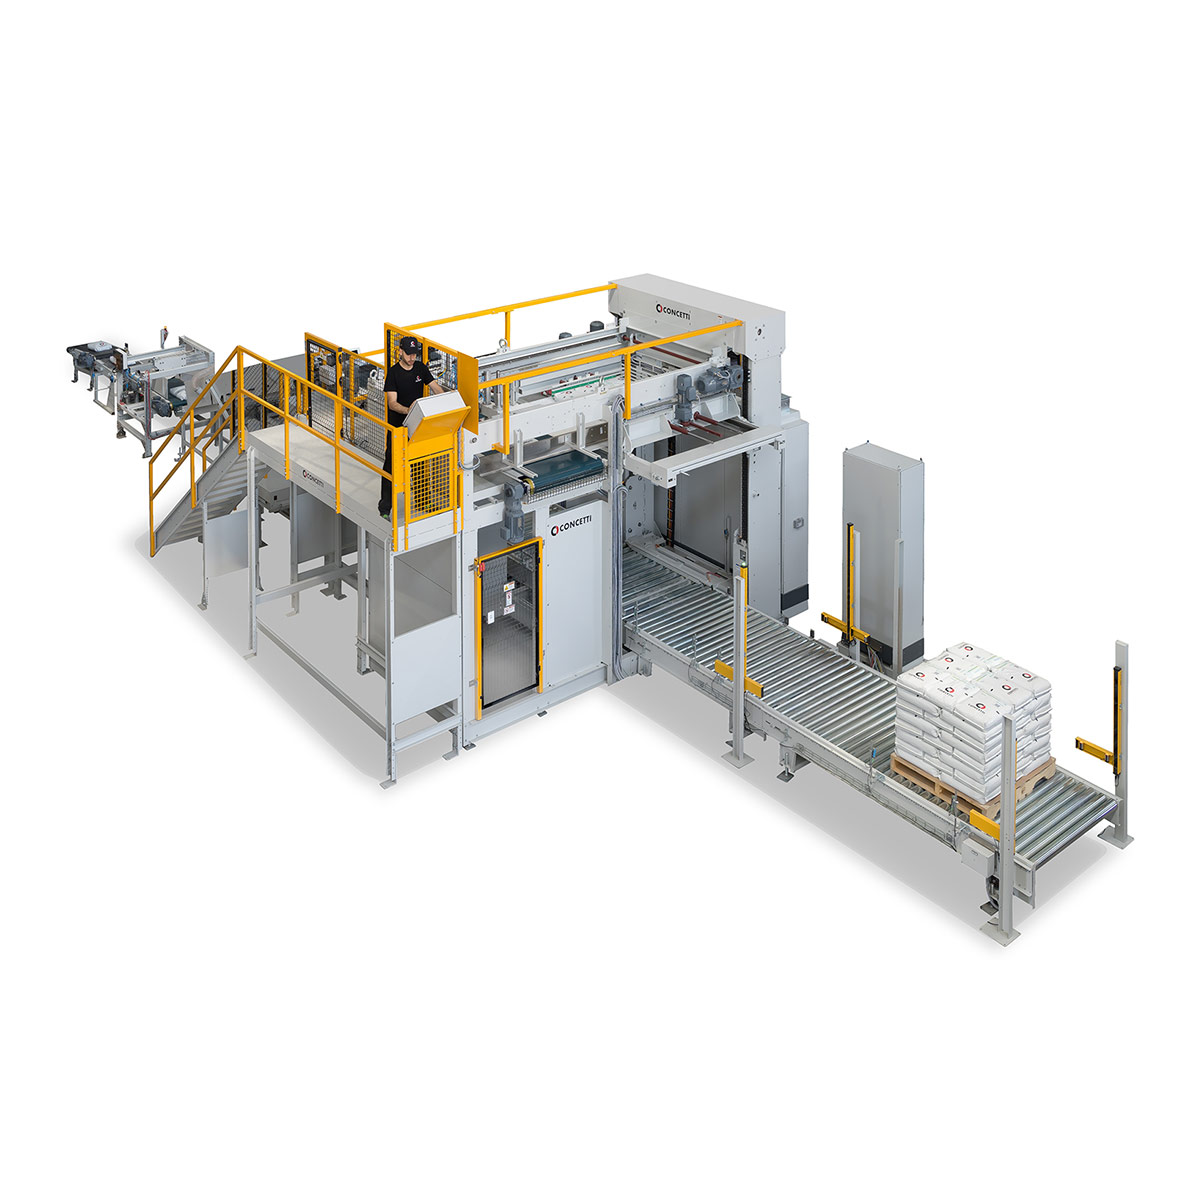 Bag Palletizing & Wrapping Systems Machines from STB Engineering